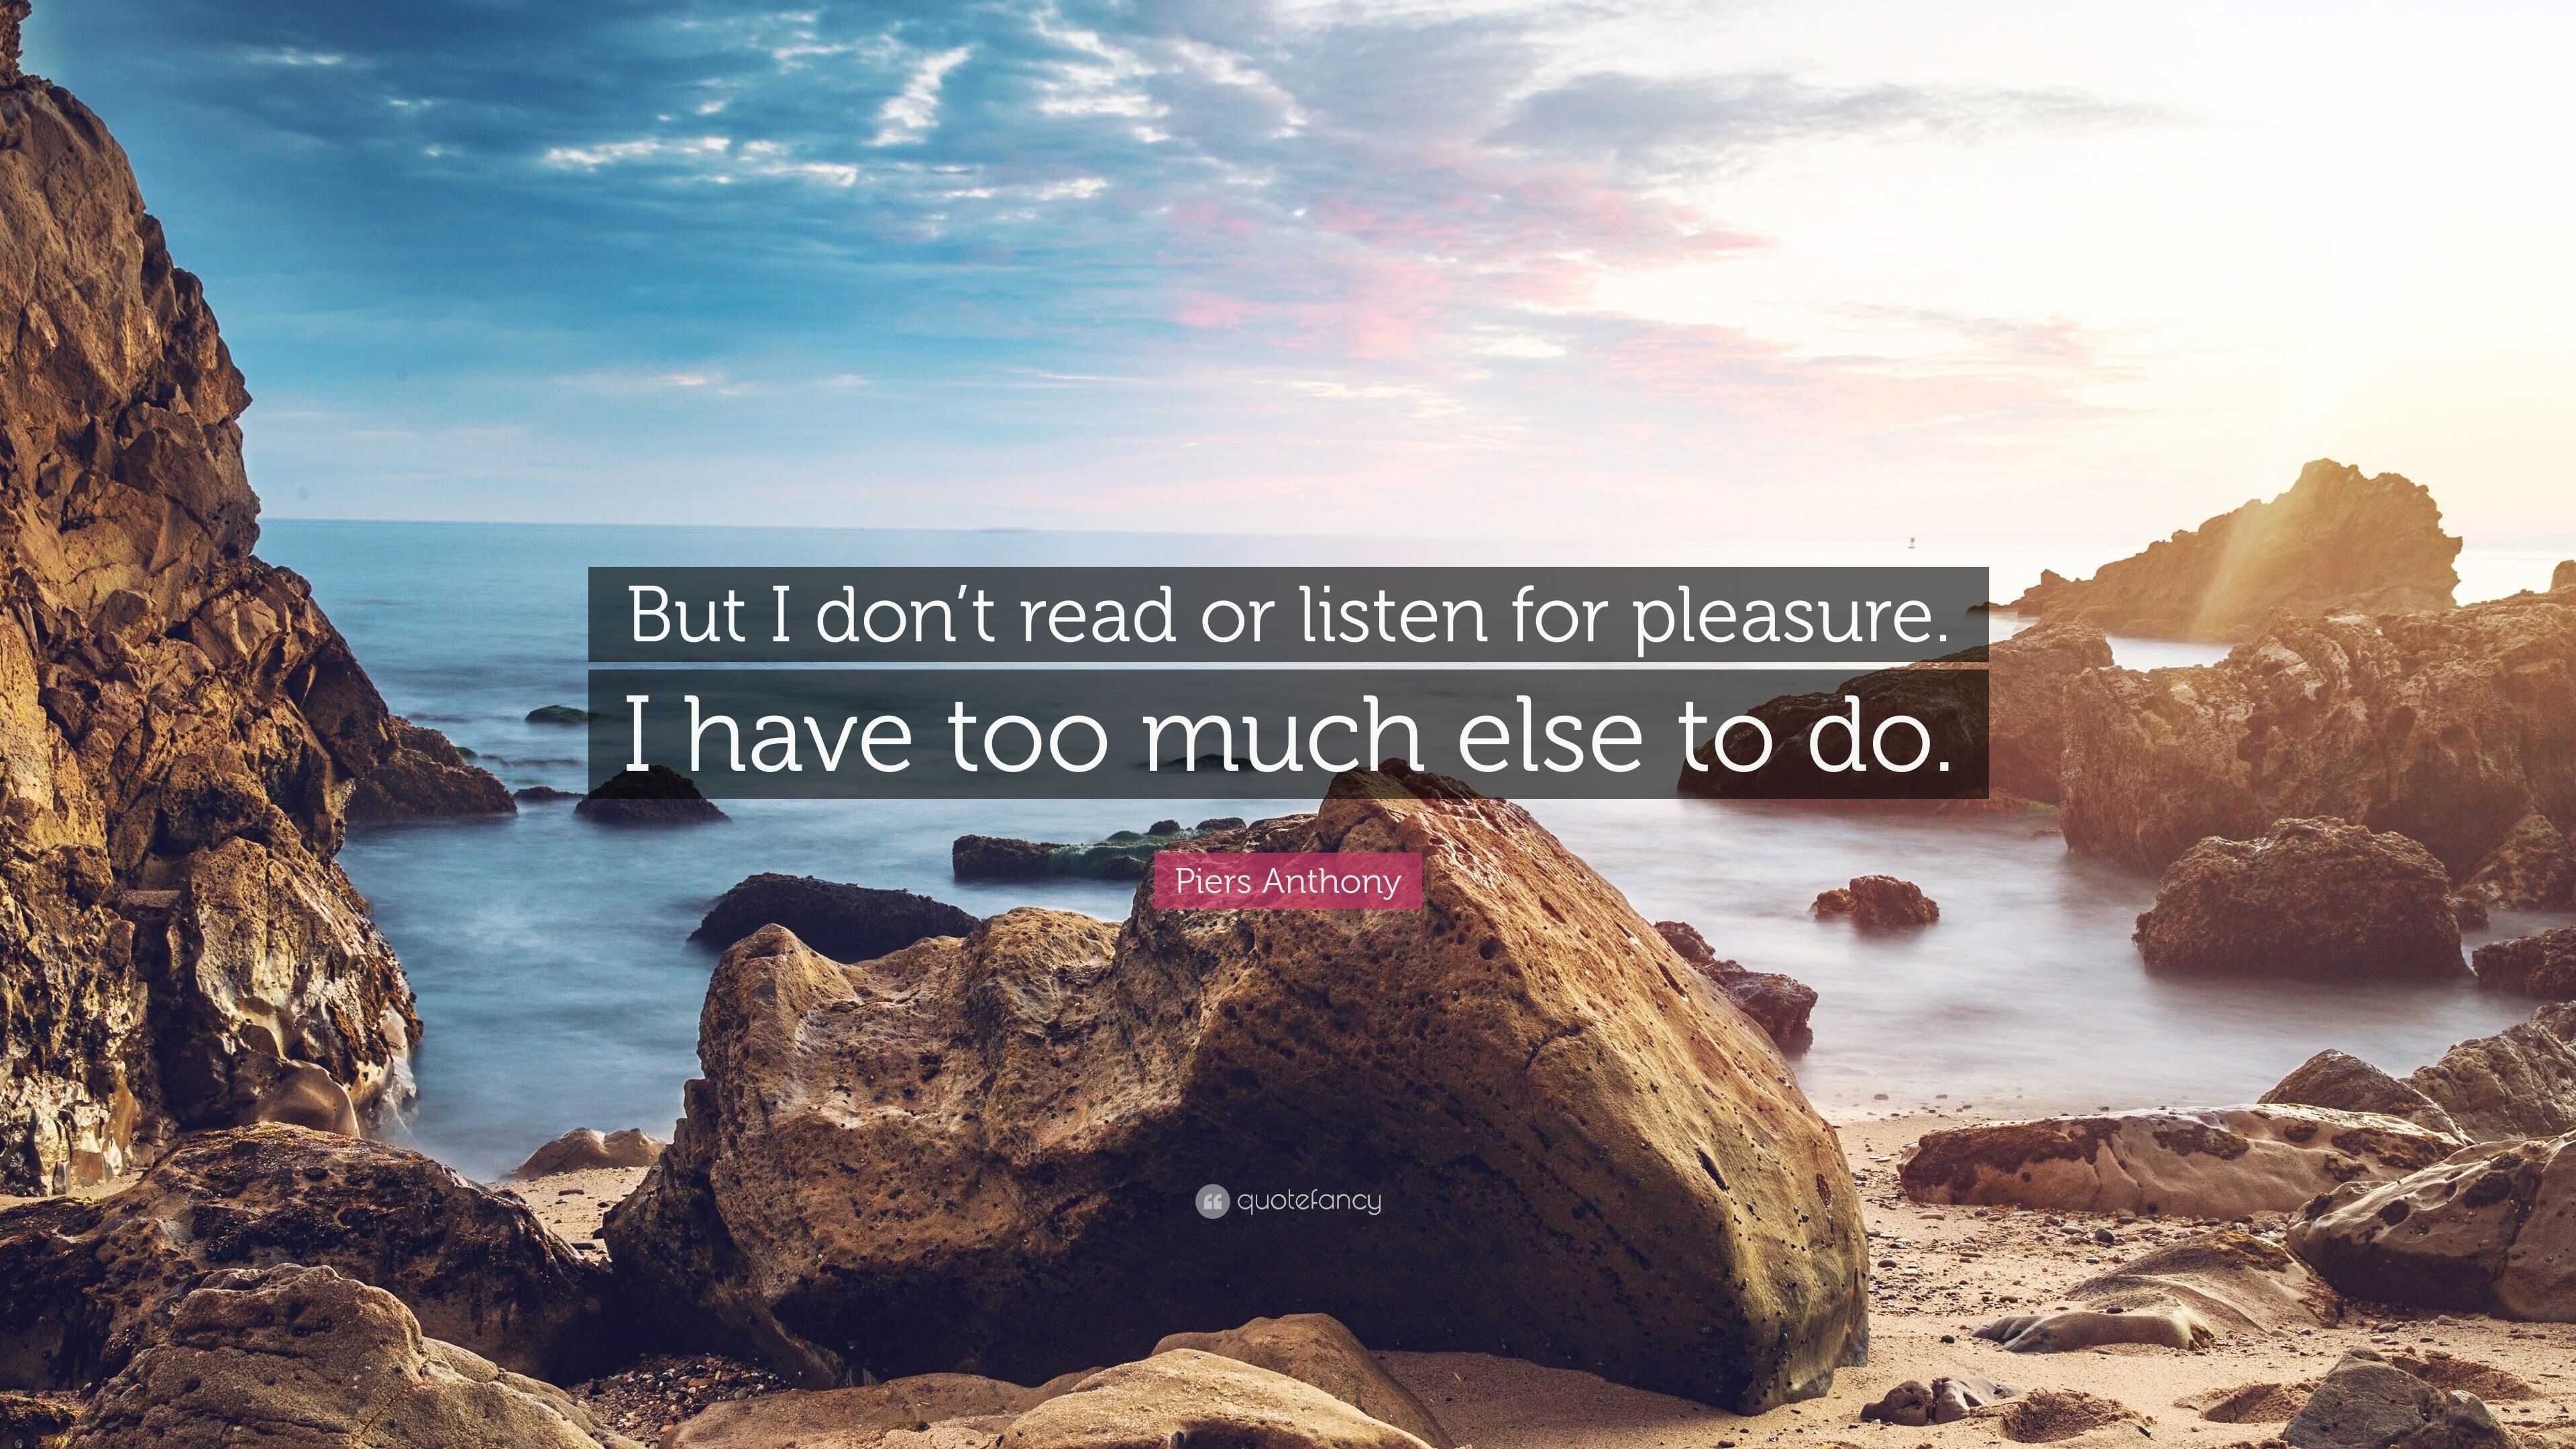 Piers Anthony Quote: “But I don’t read or listen for pleasure. I have ...